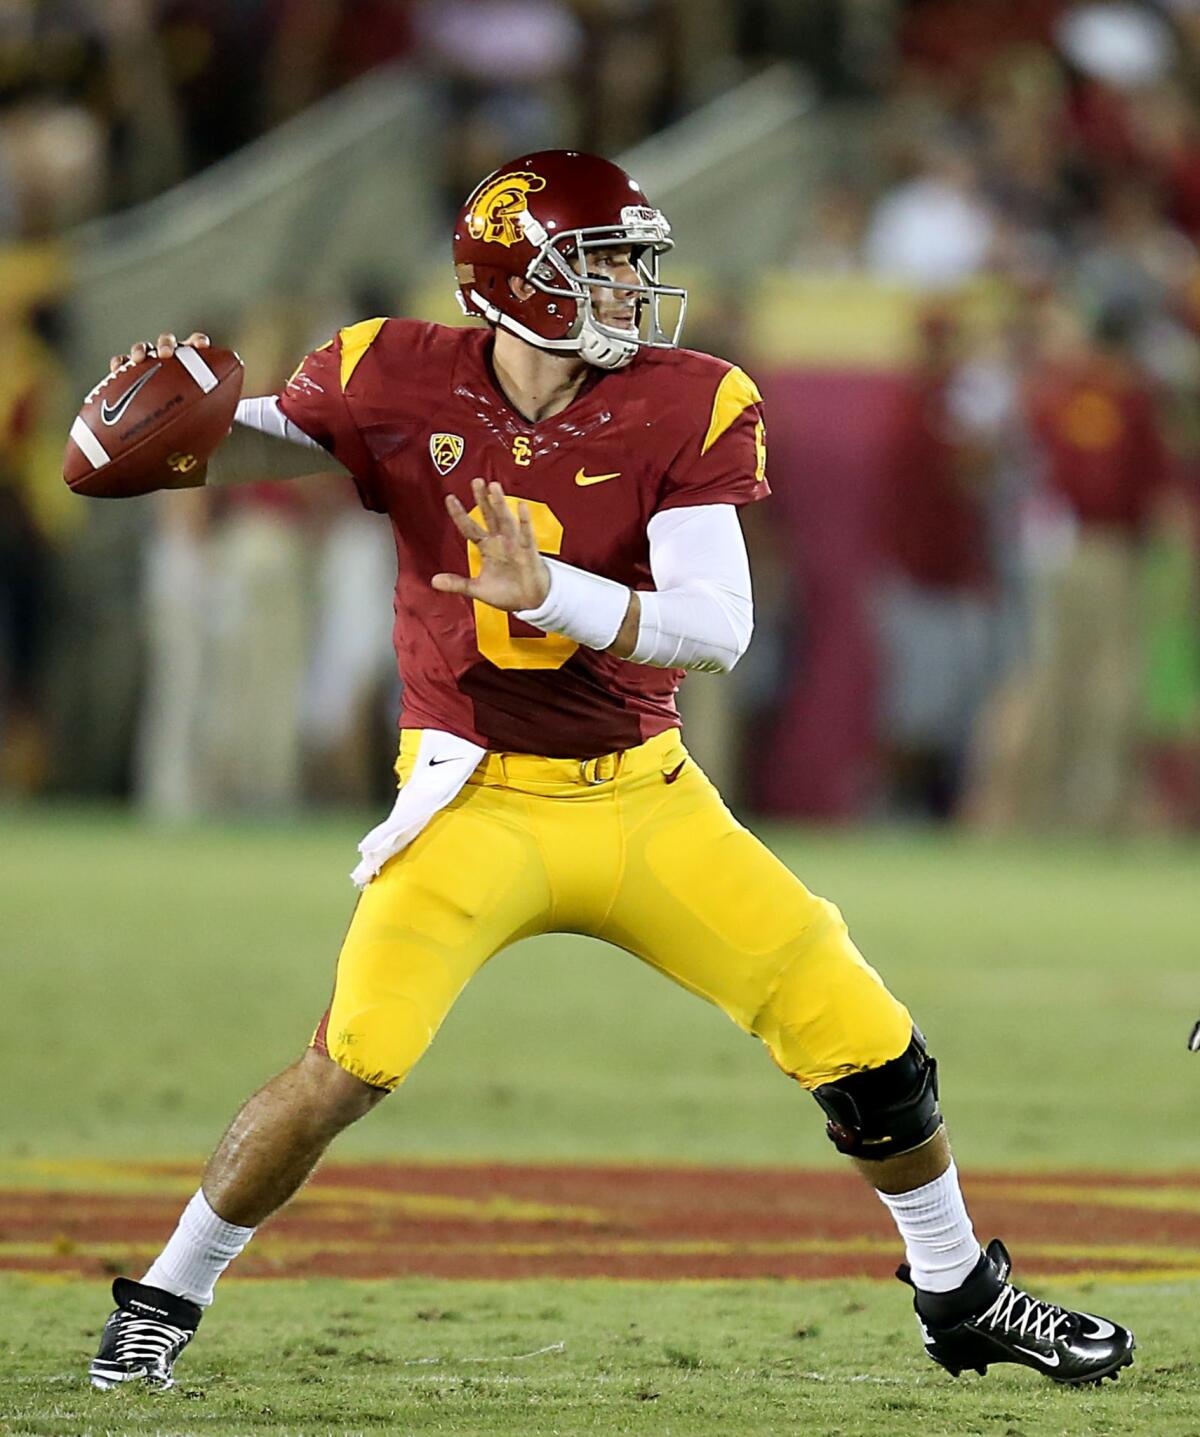 USC's Cody Kessler says he has "a new sense of confidence" now that he has been named the Trojans' starting quarterback.